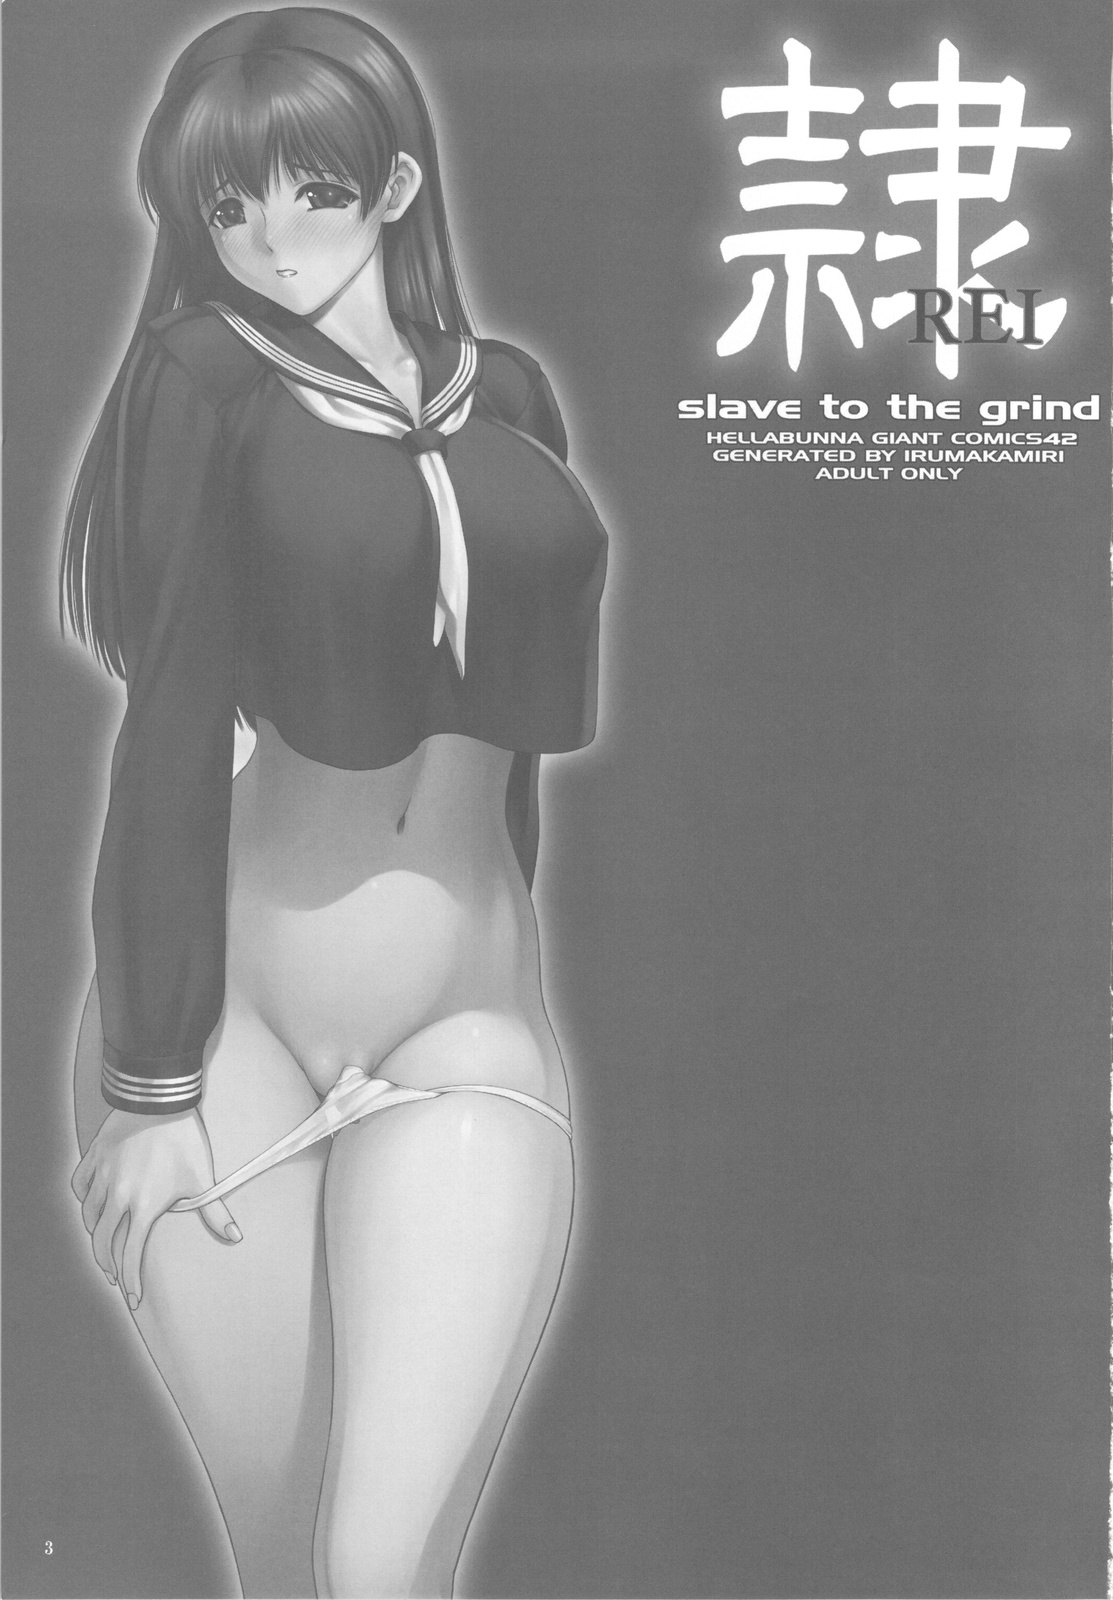 REI - slave to the grind - REI 07: CHAPTER 06 numero d'image 2